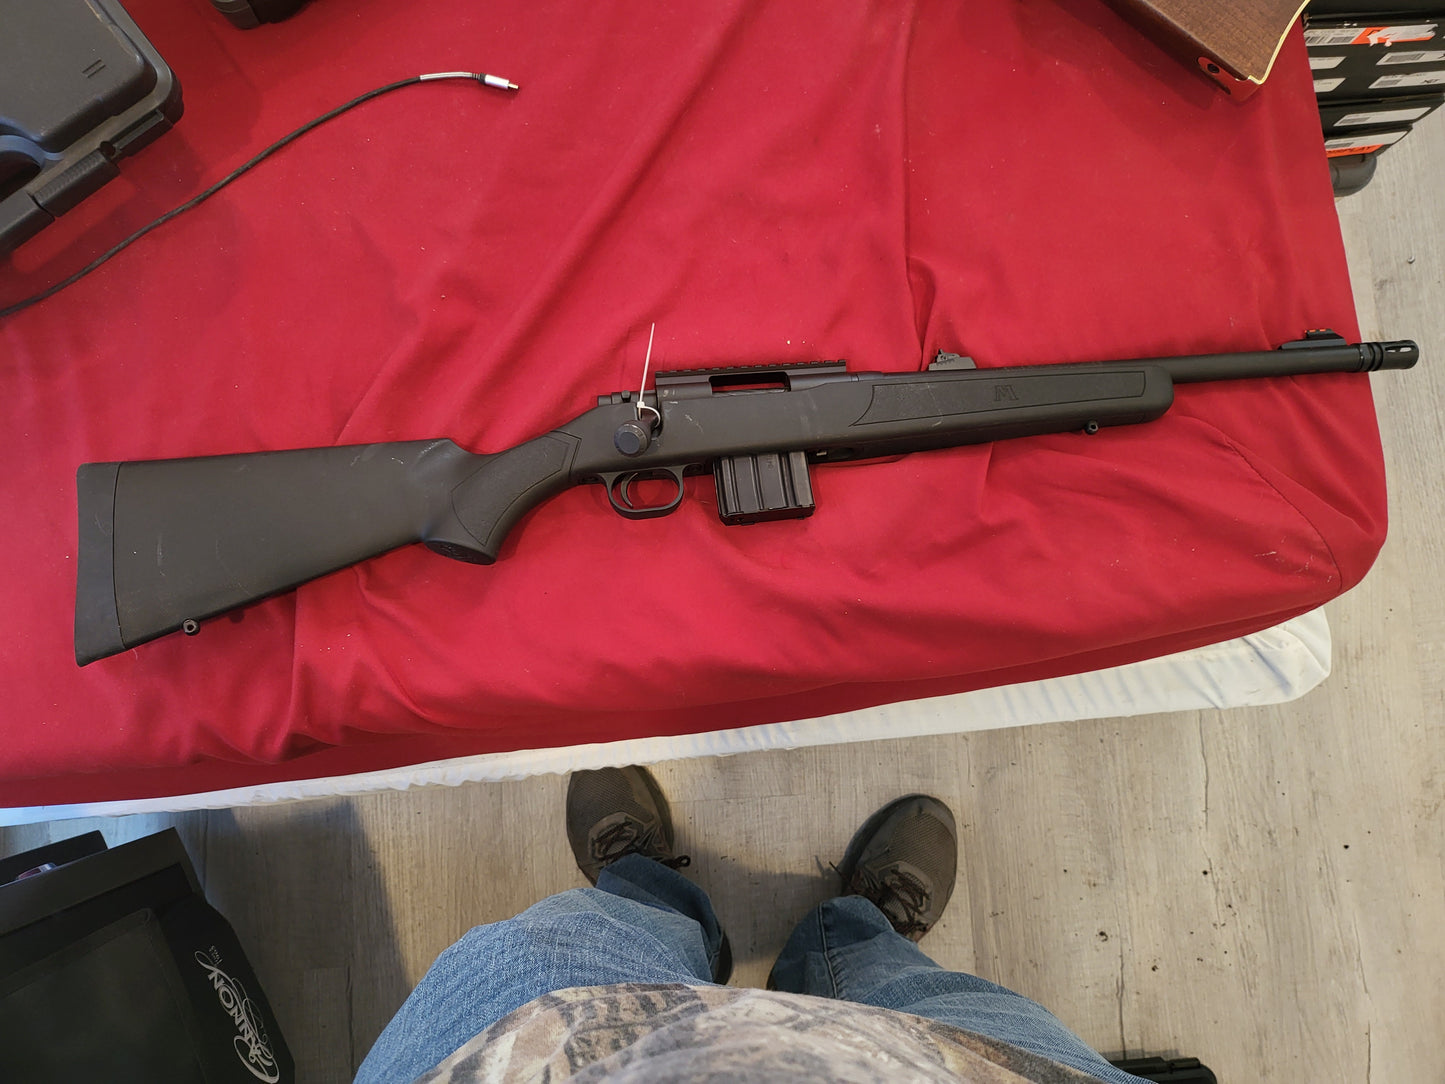 Mossberg MVP Patrol .300 AAC Blackout Bolt Action Rifle 10 round mag